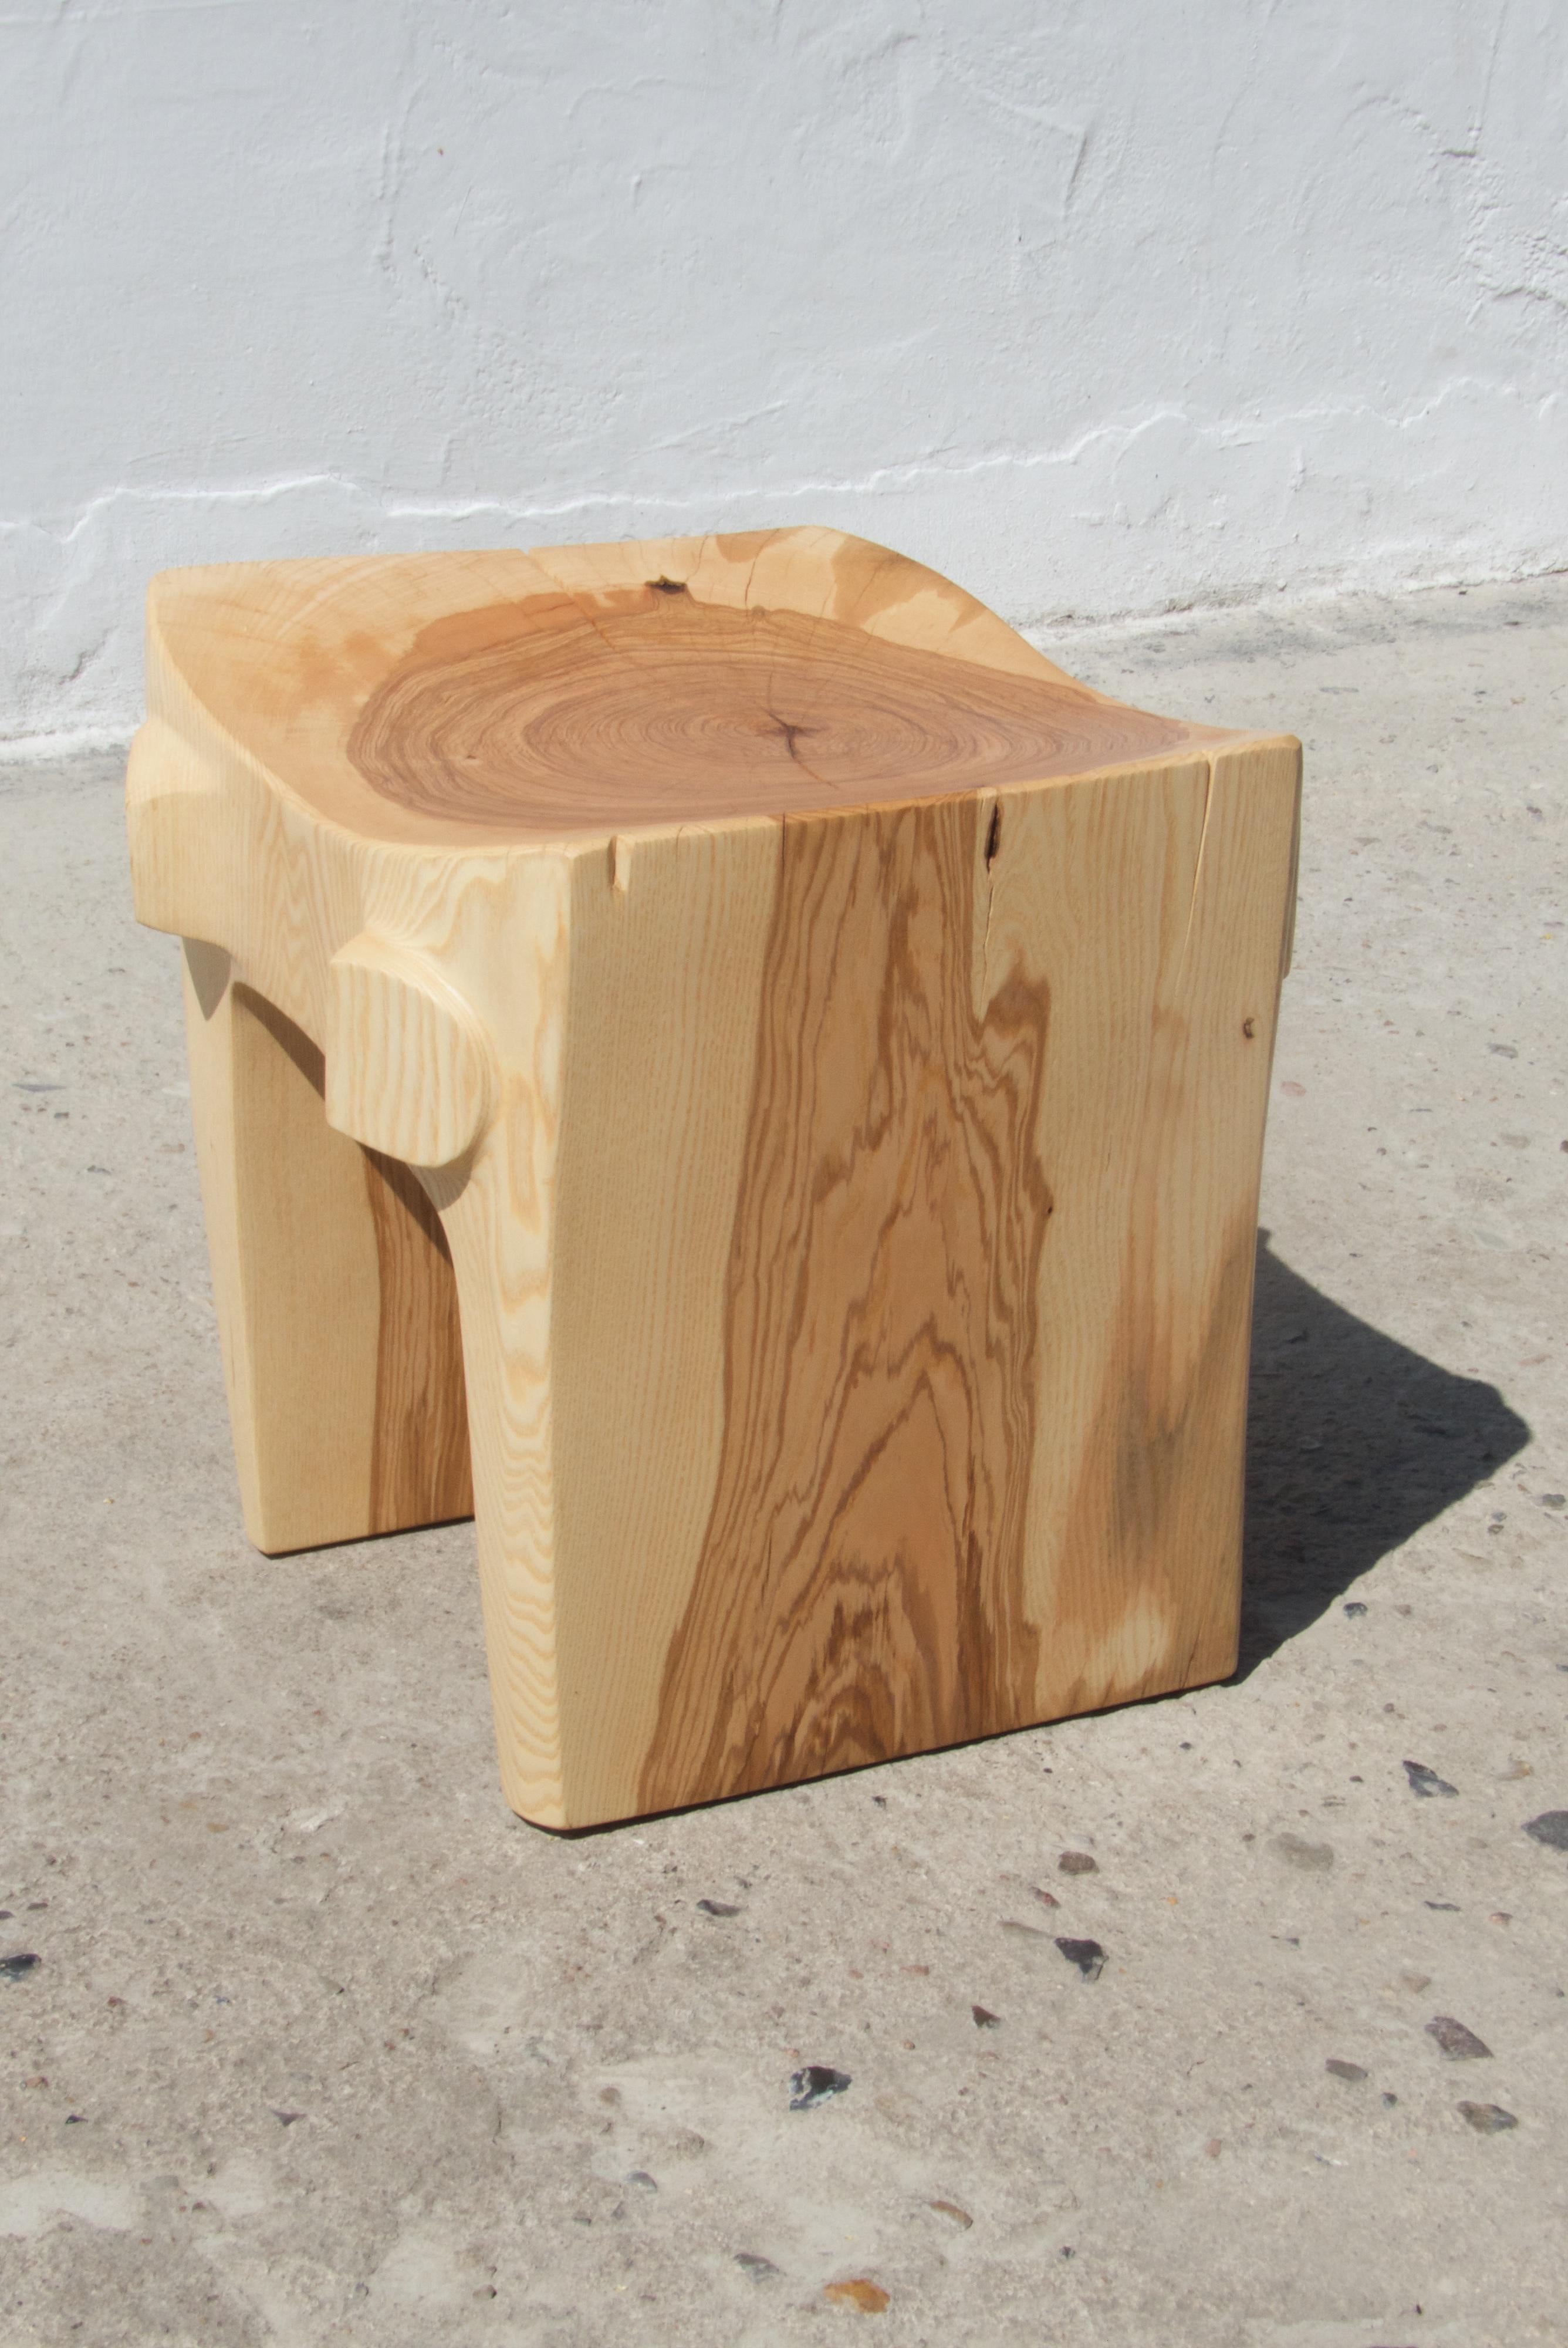 Unique signed Ash stool by Jörg Pietschmann
Ash
Dimensions: H 55 x W 97 x D 53 cm


Side piece of an old oak with exceptional burl on colorful legs. Polished oil finish.

In Pietschmann’s sculptures, trees that for centuries were part of a